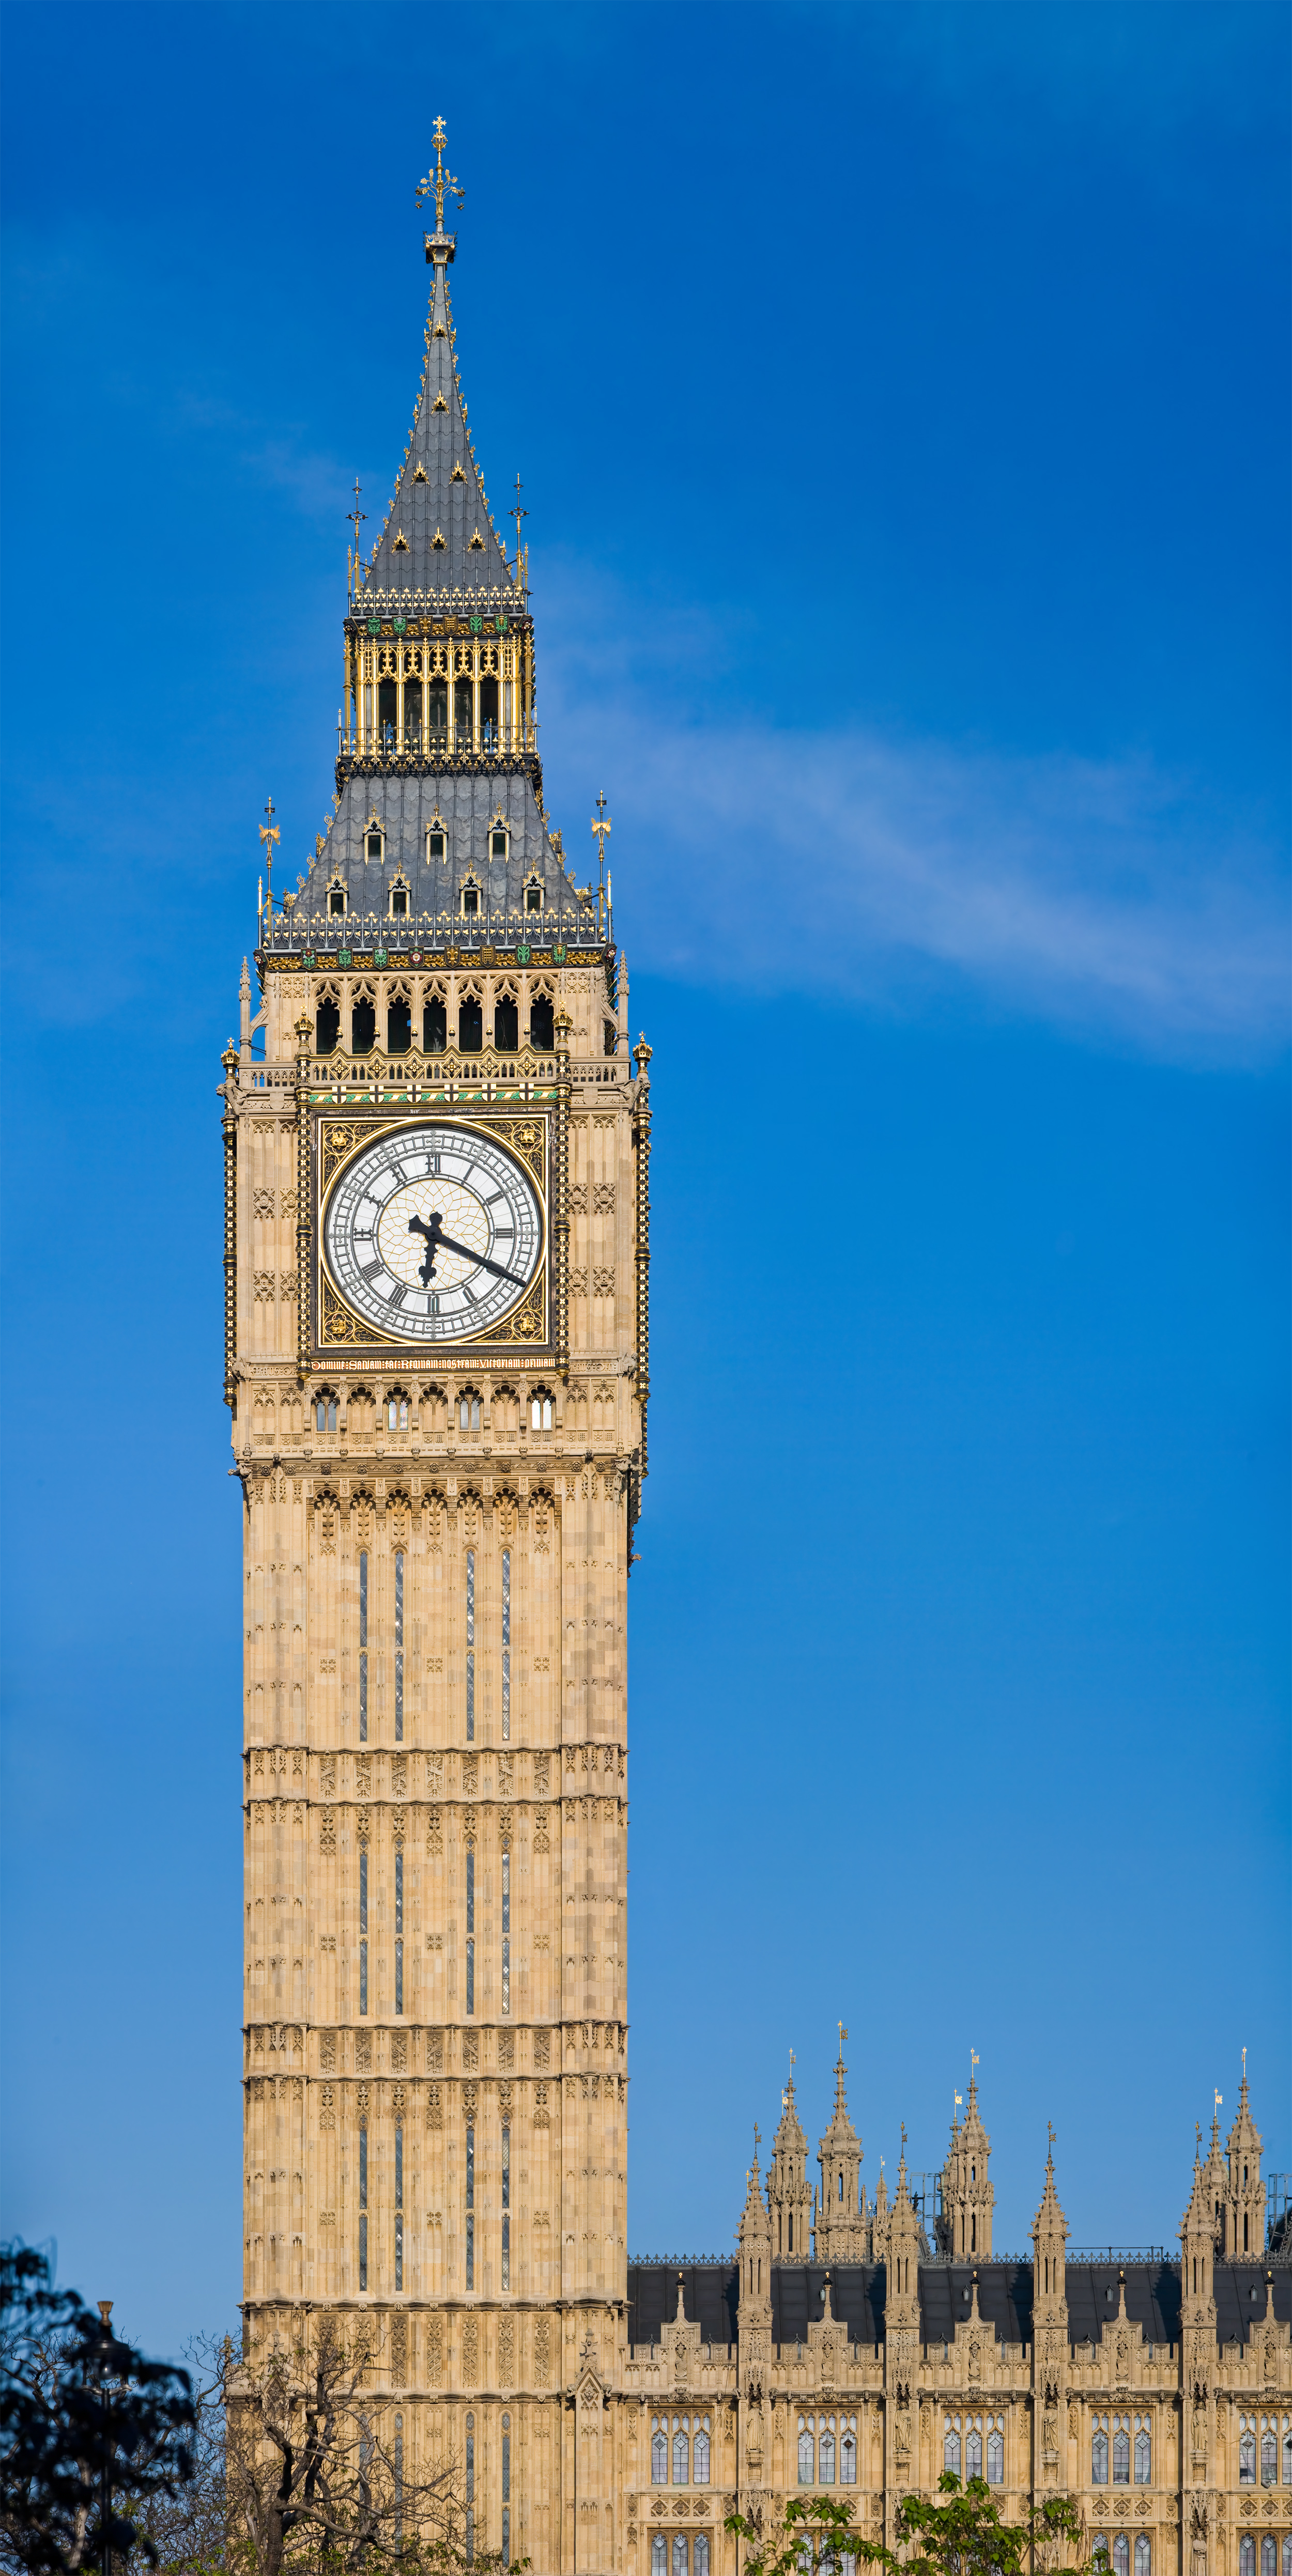 Clock_Tower_Palace_of_Westminster,_London